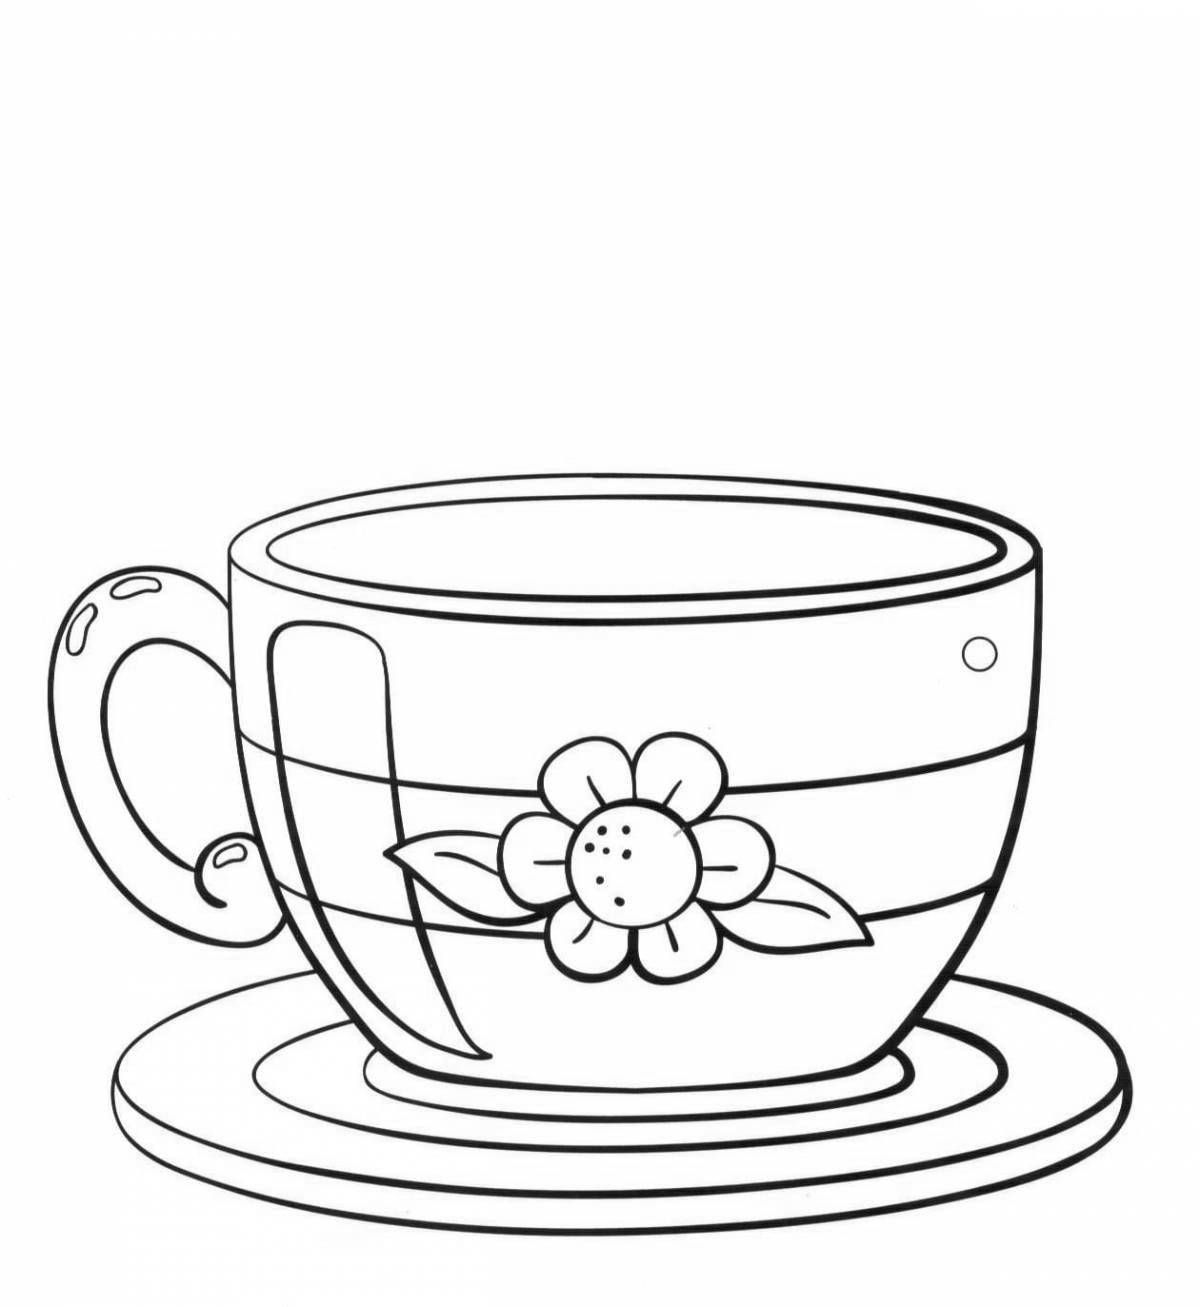 Glitter cup and saucer coloring page